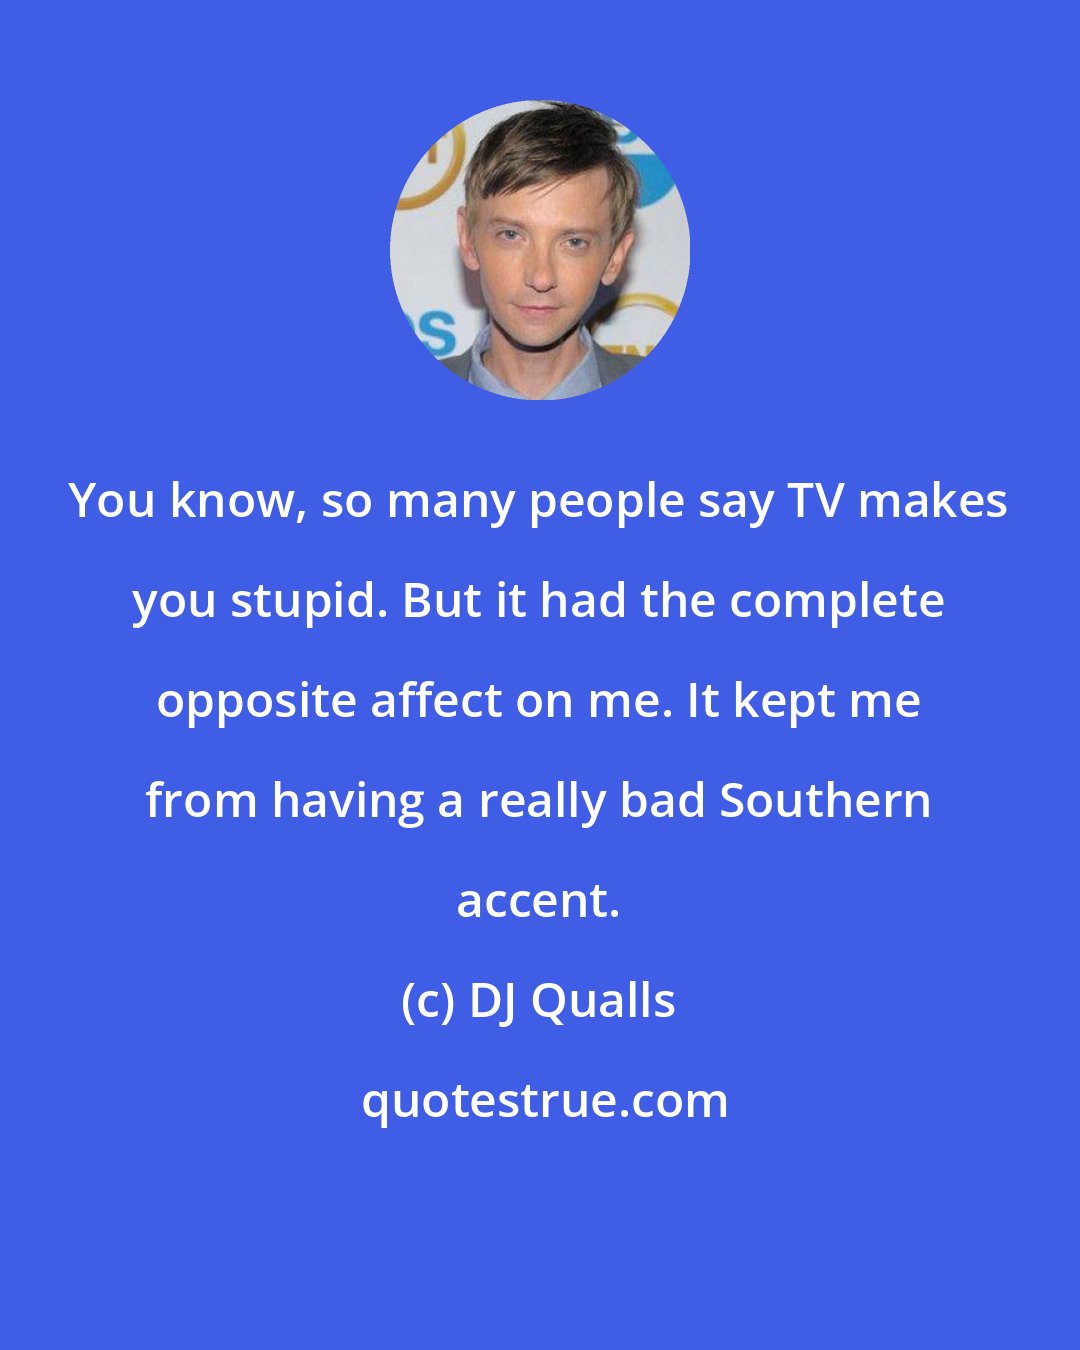 DJ Qualls: You know, so many people say TV makes you stupid. But it had the complete opposite affect on me. It kept me from having a really bad Southern accent.